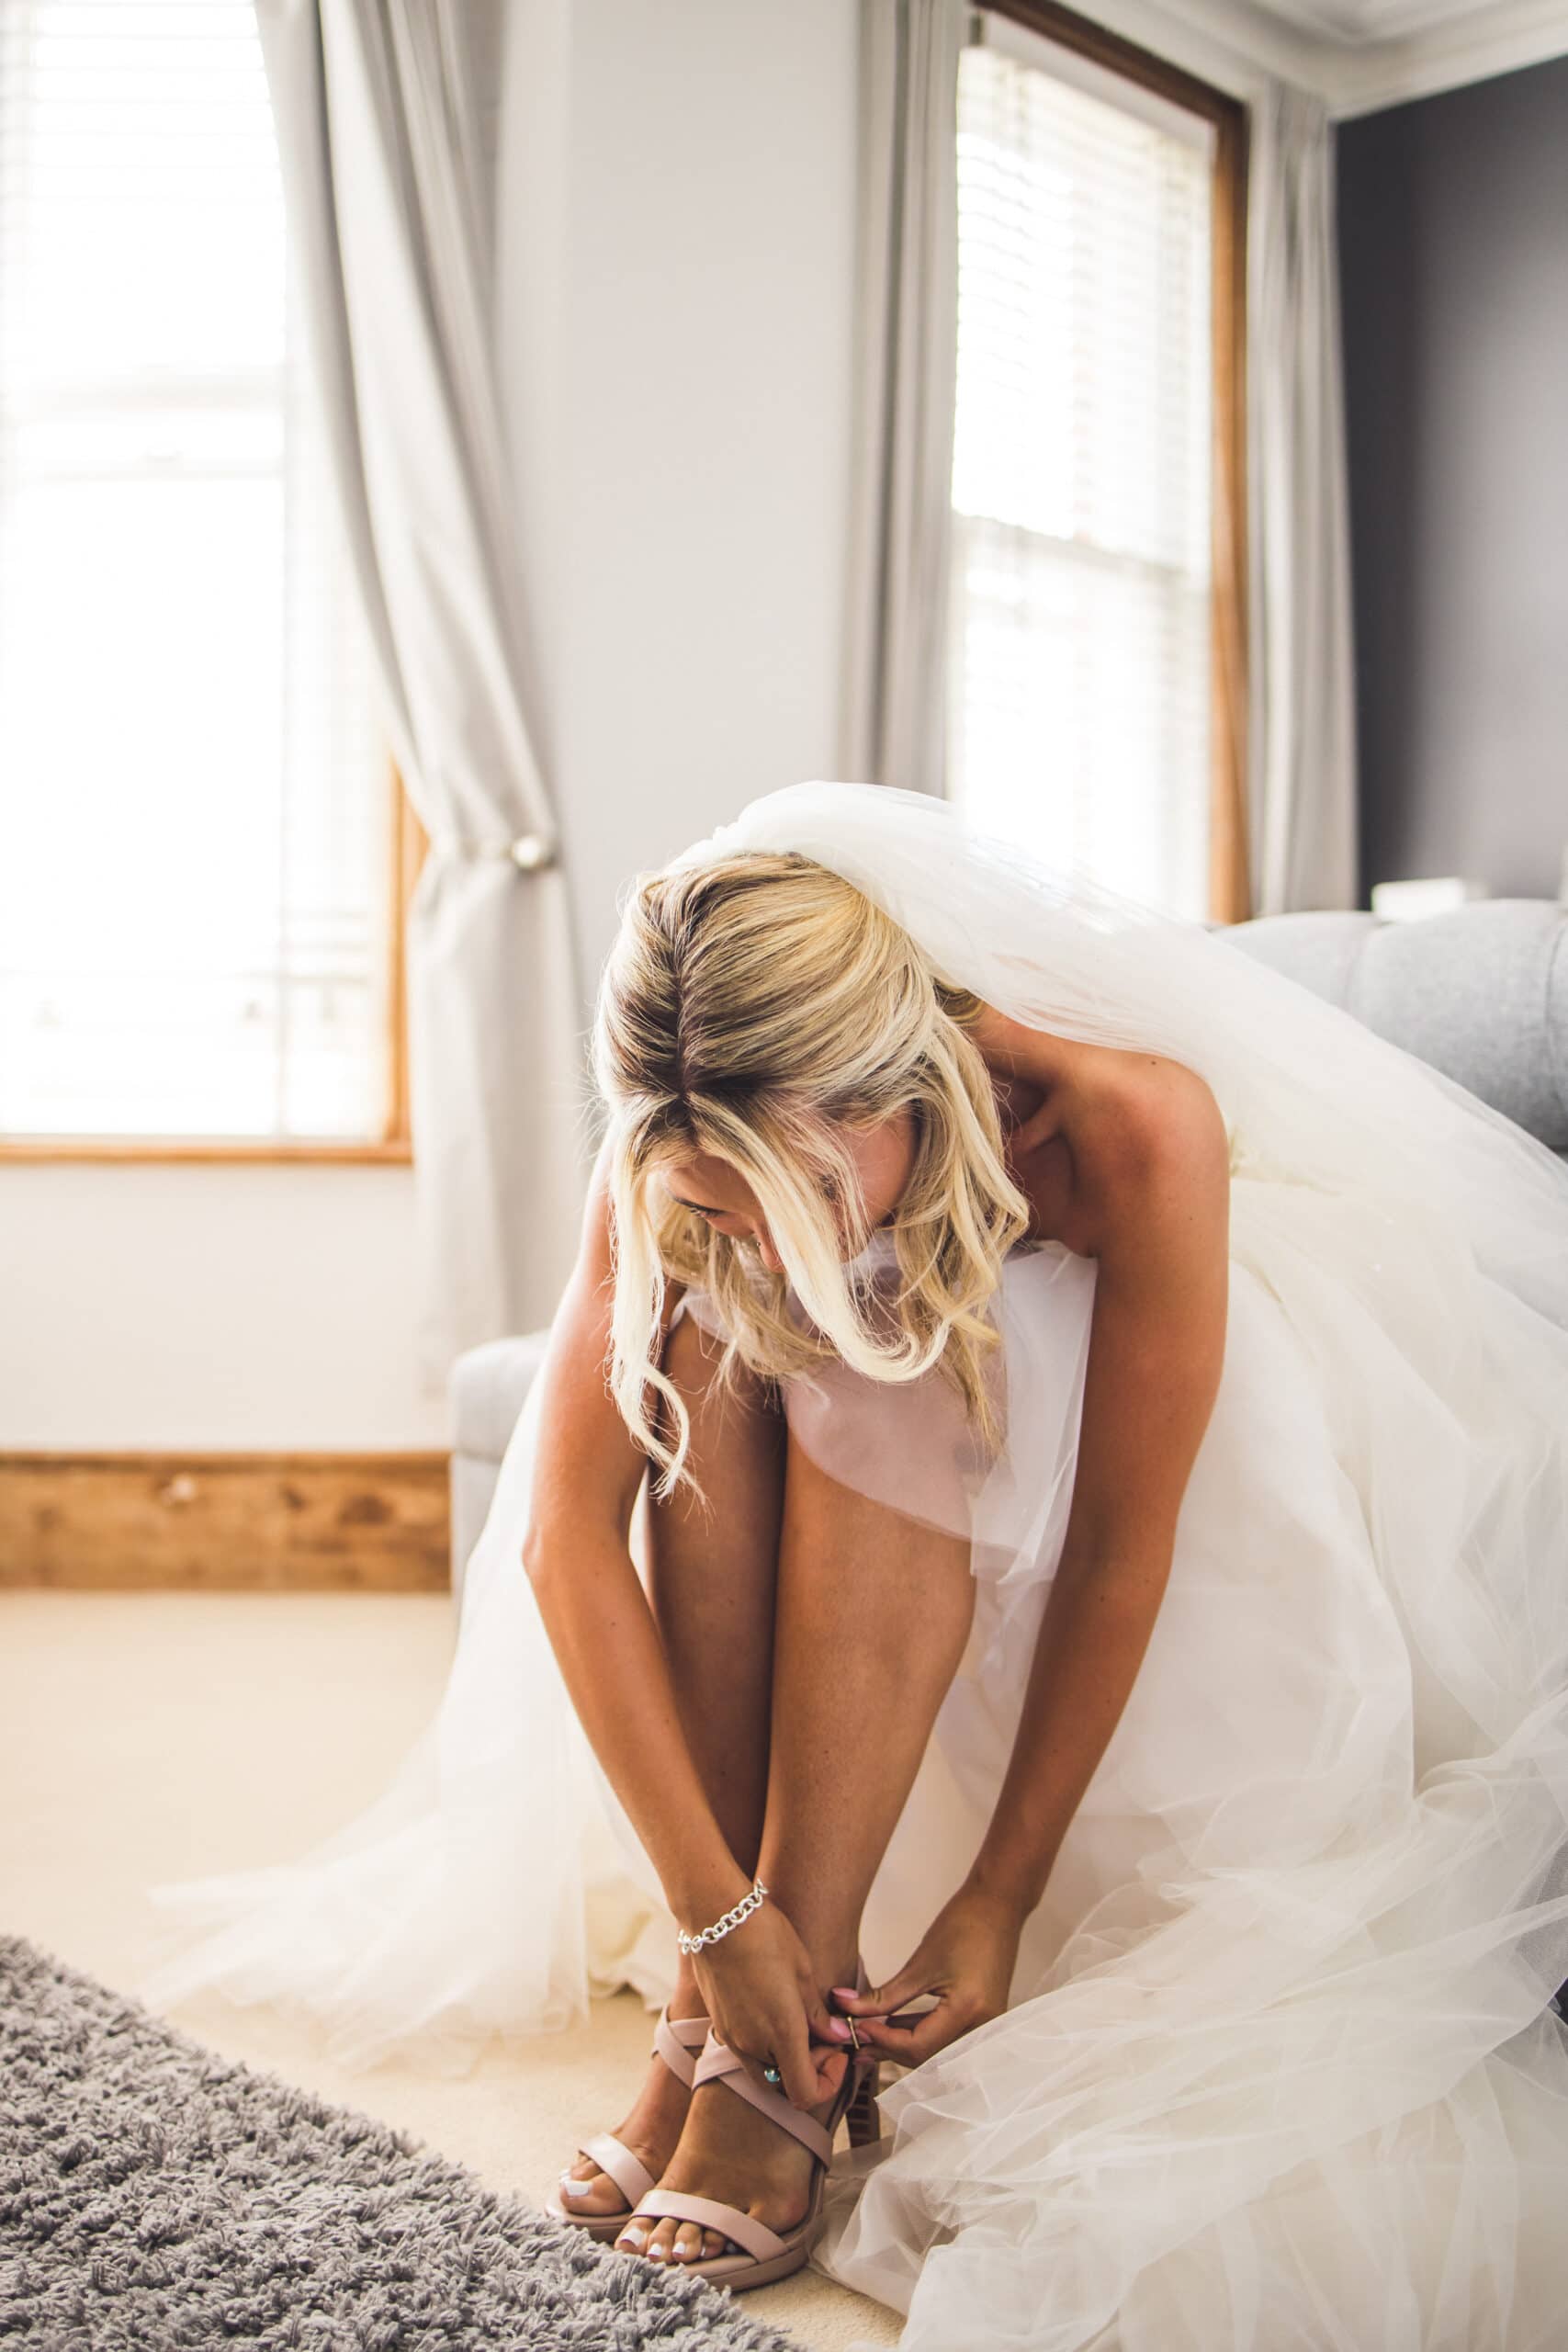 A bride putting on her wedding shoes before heading to her ceremony